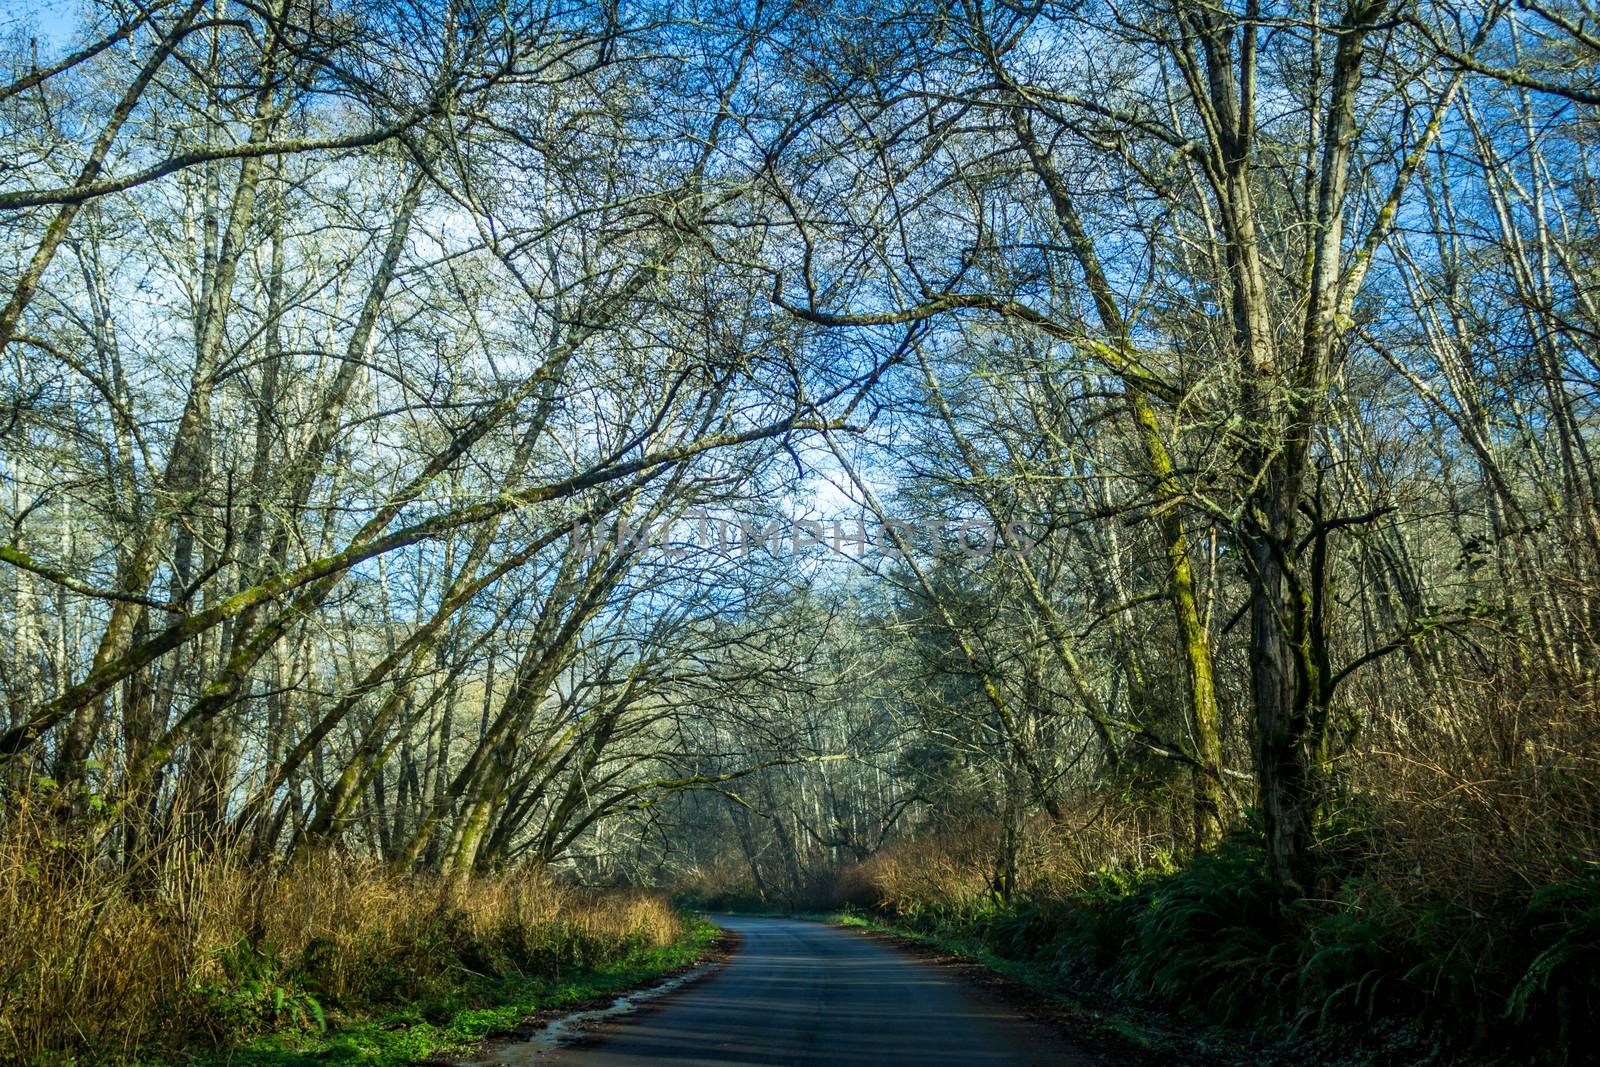 A tree-lined road in Northern California with blue sky and some clouds.